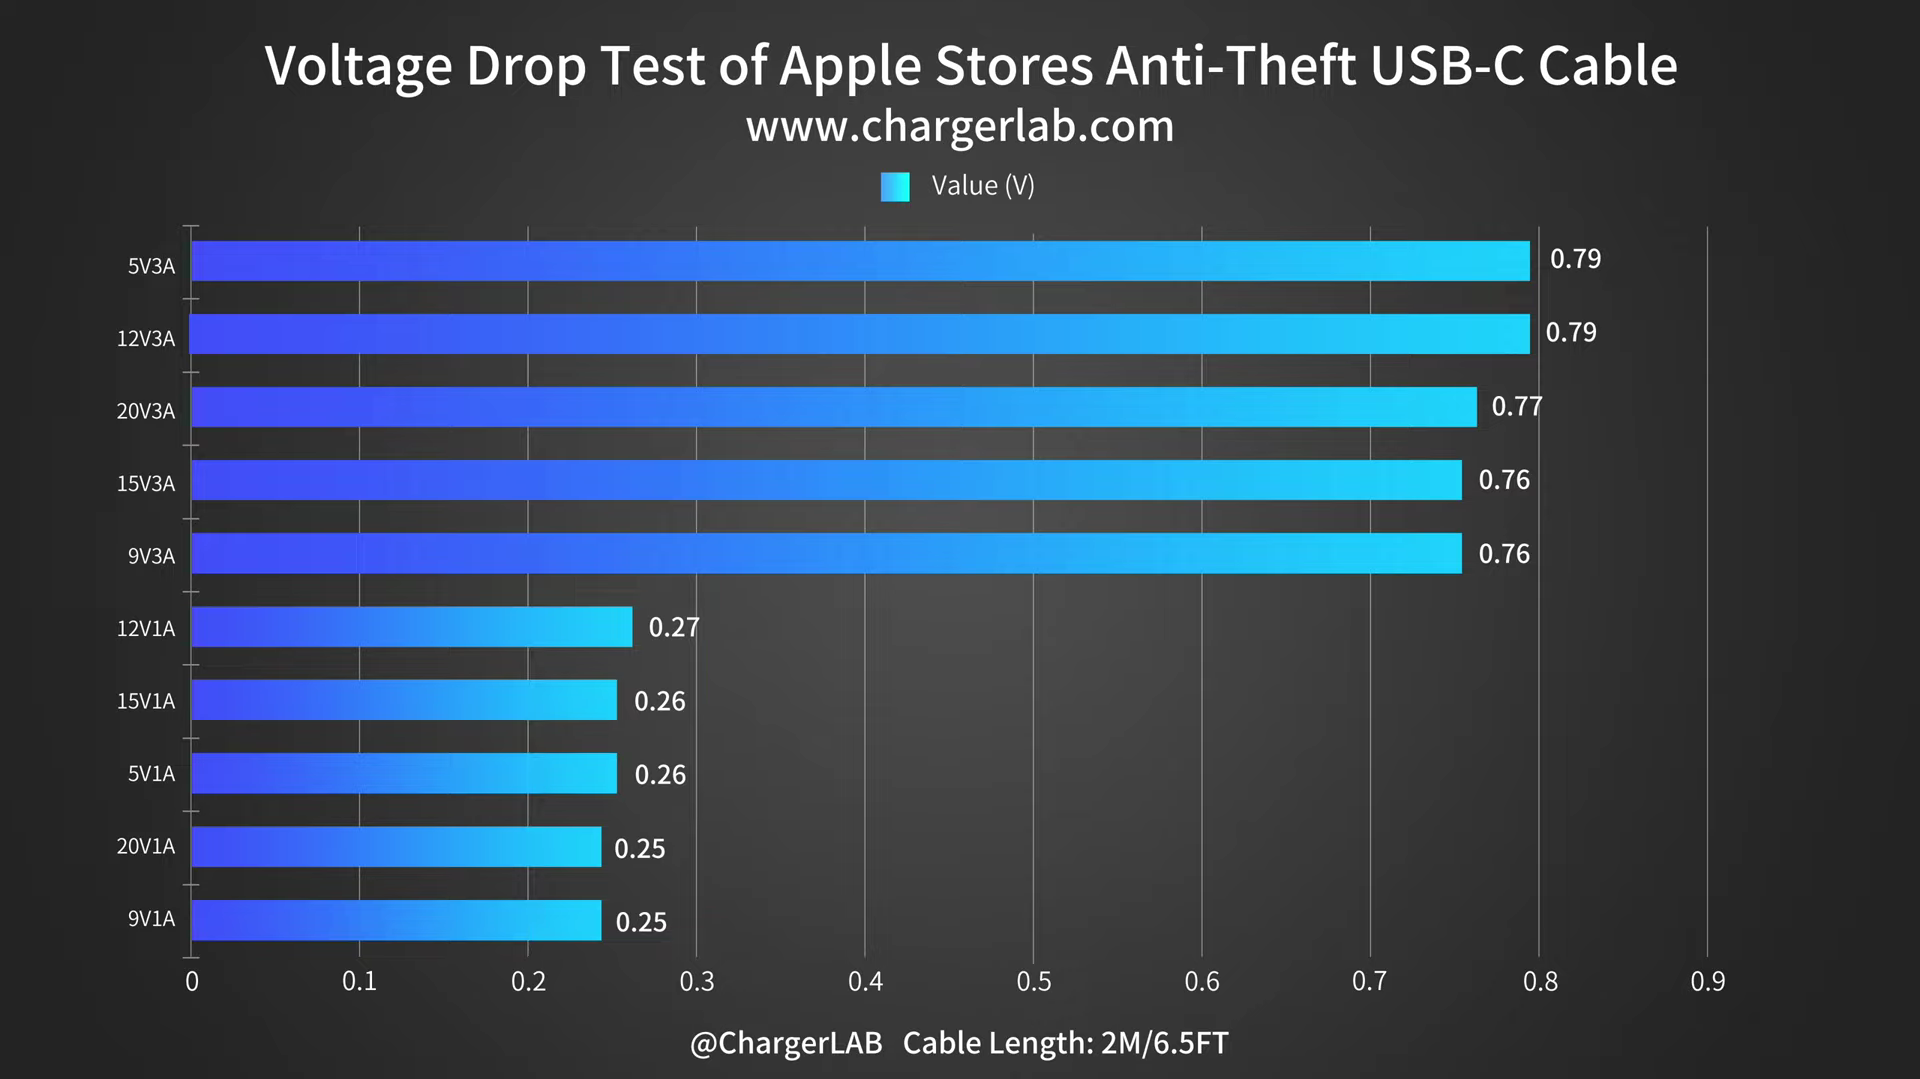 Review of Apple Stores Anti-Theft USB-C Cable-Chargerlab